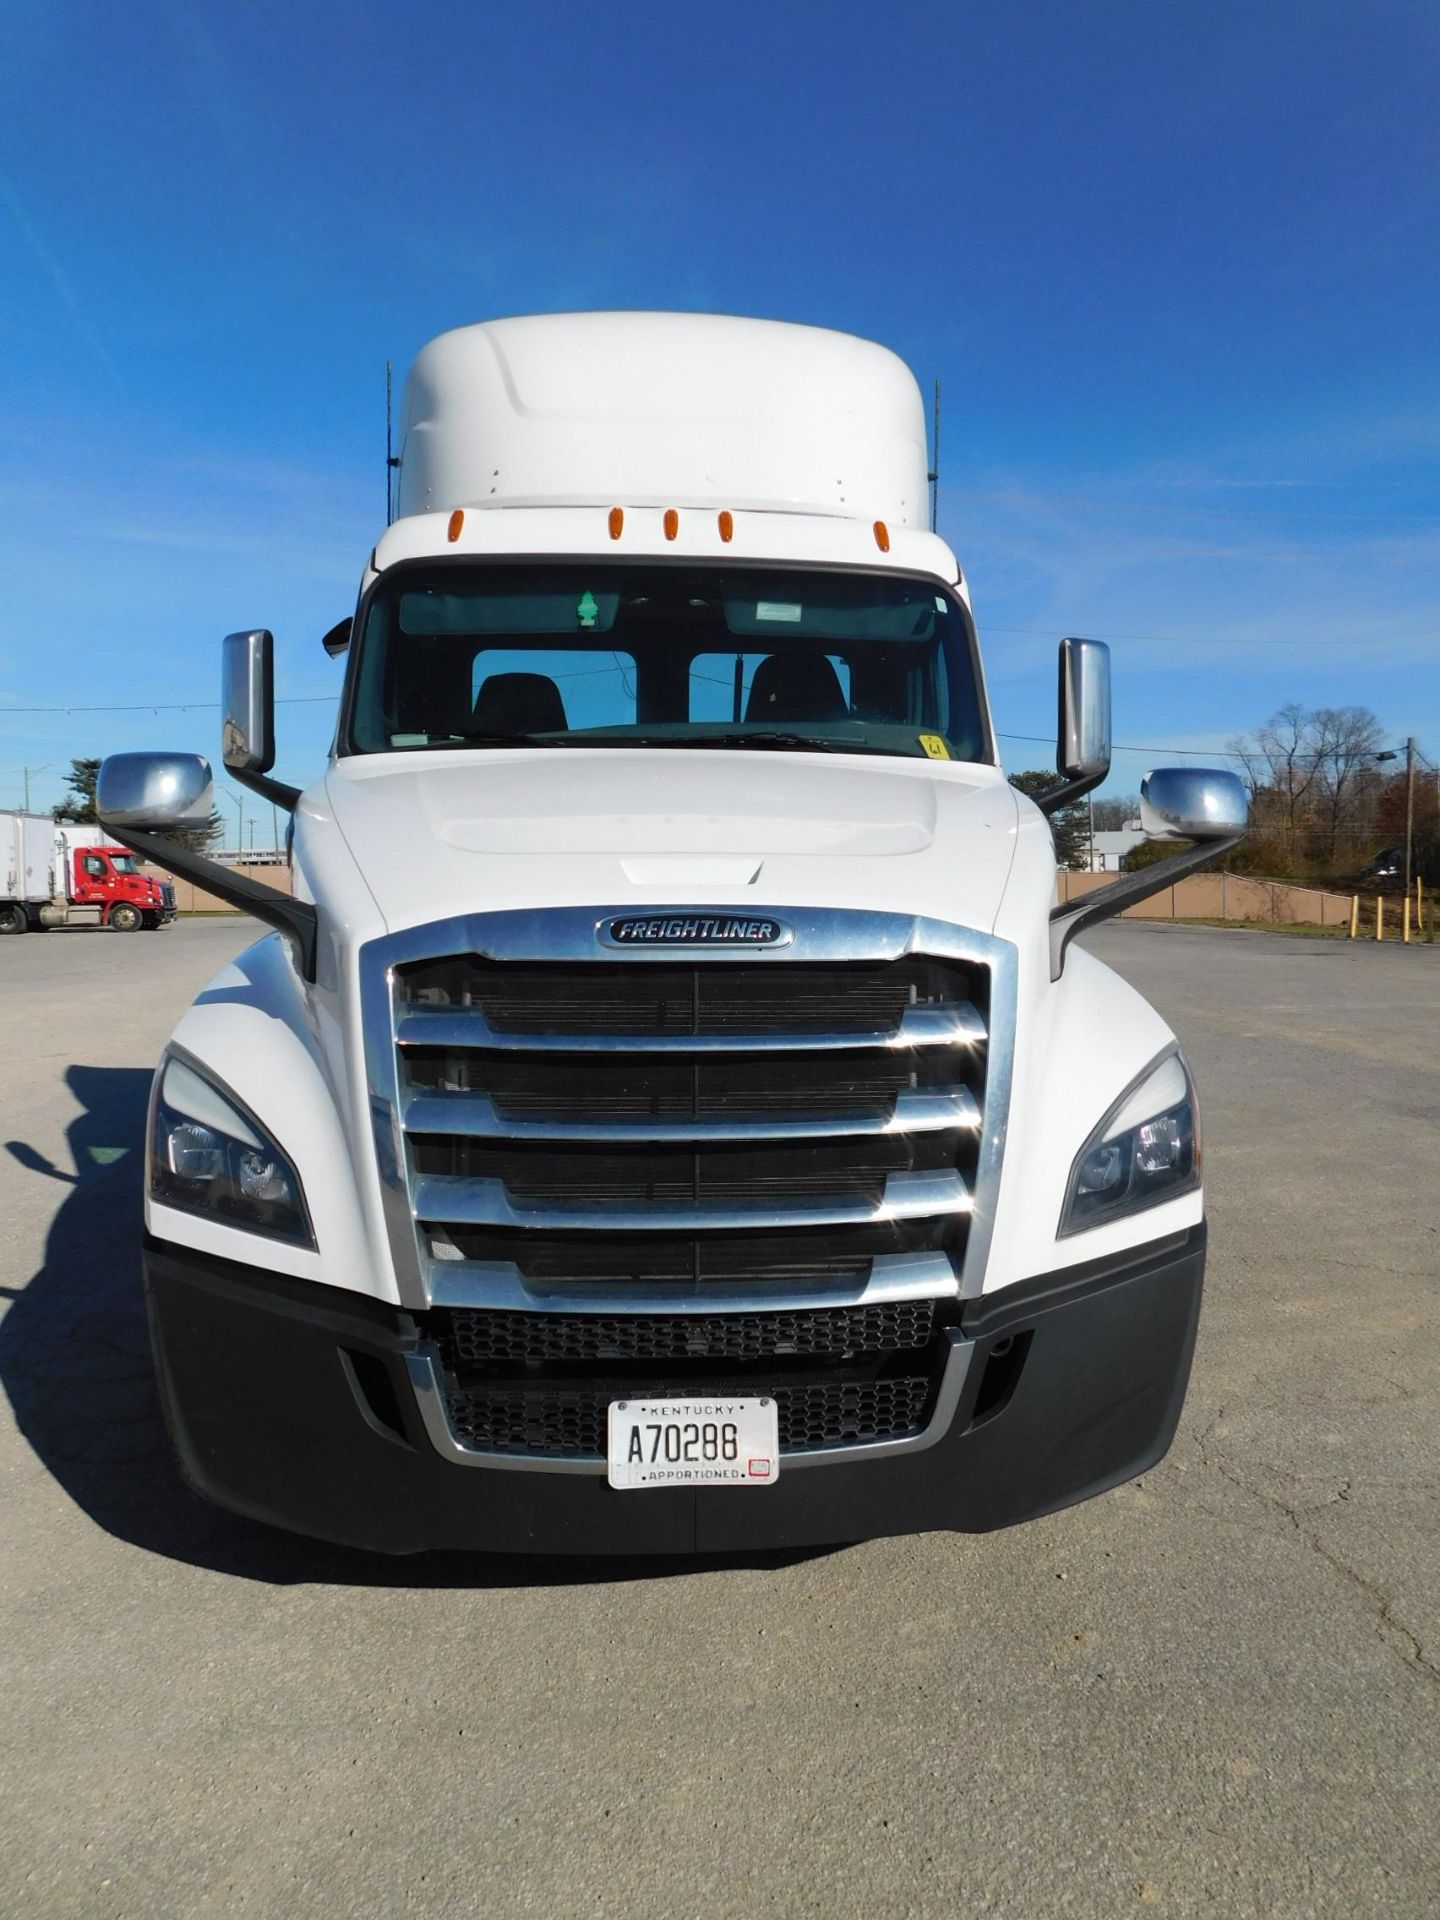 2019 Freightliner Tandem Axle Cascadia 126 Truck Tractor, Day Cab, 525 HP Detroit DD13 Diesel - Image 8 of 25